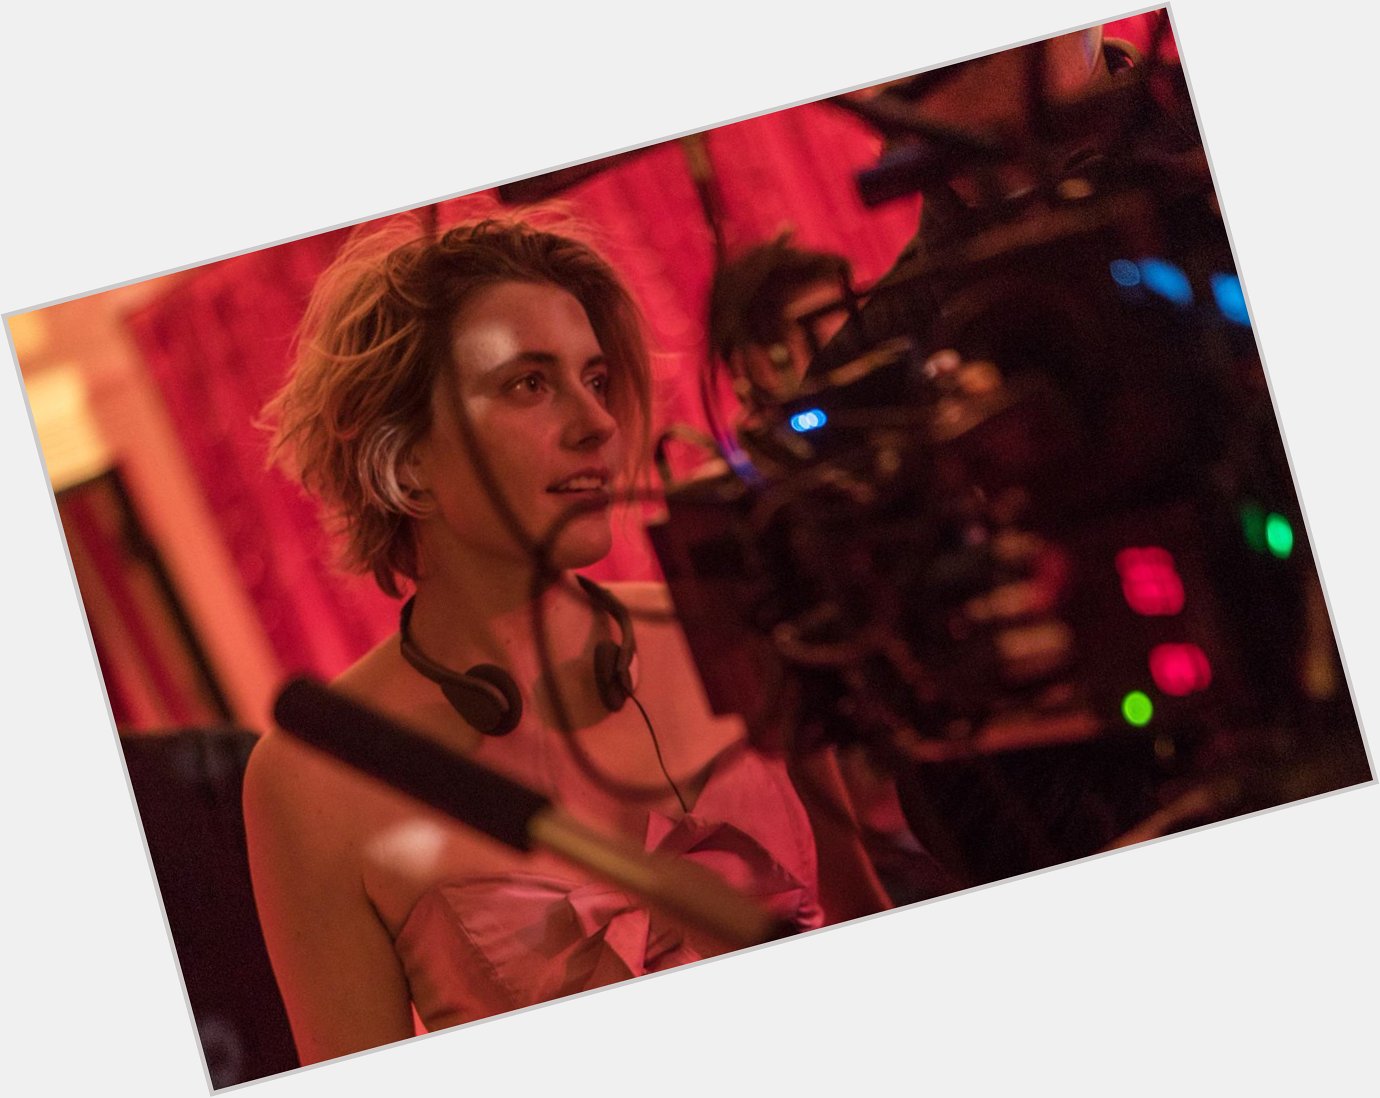 Happy birthday to one of my favorite actresses and directors, Greta Gerwig 